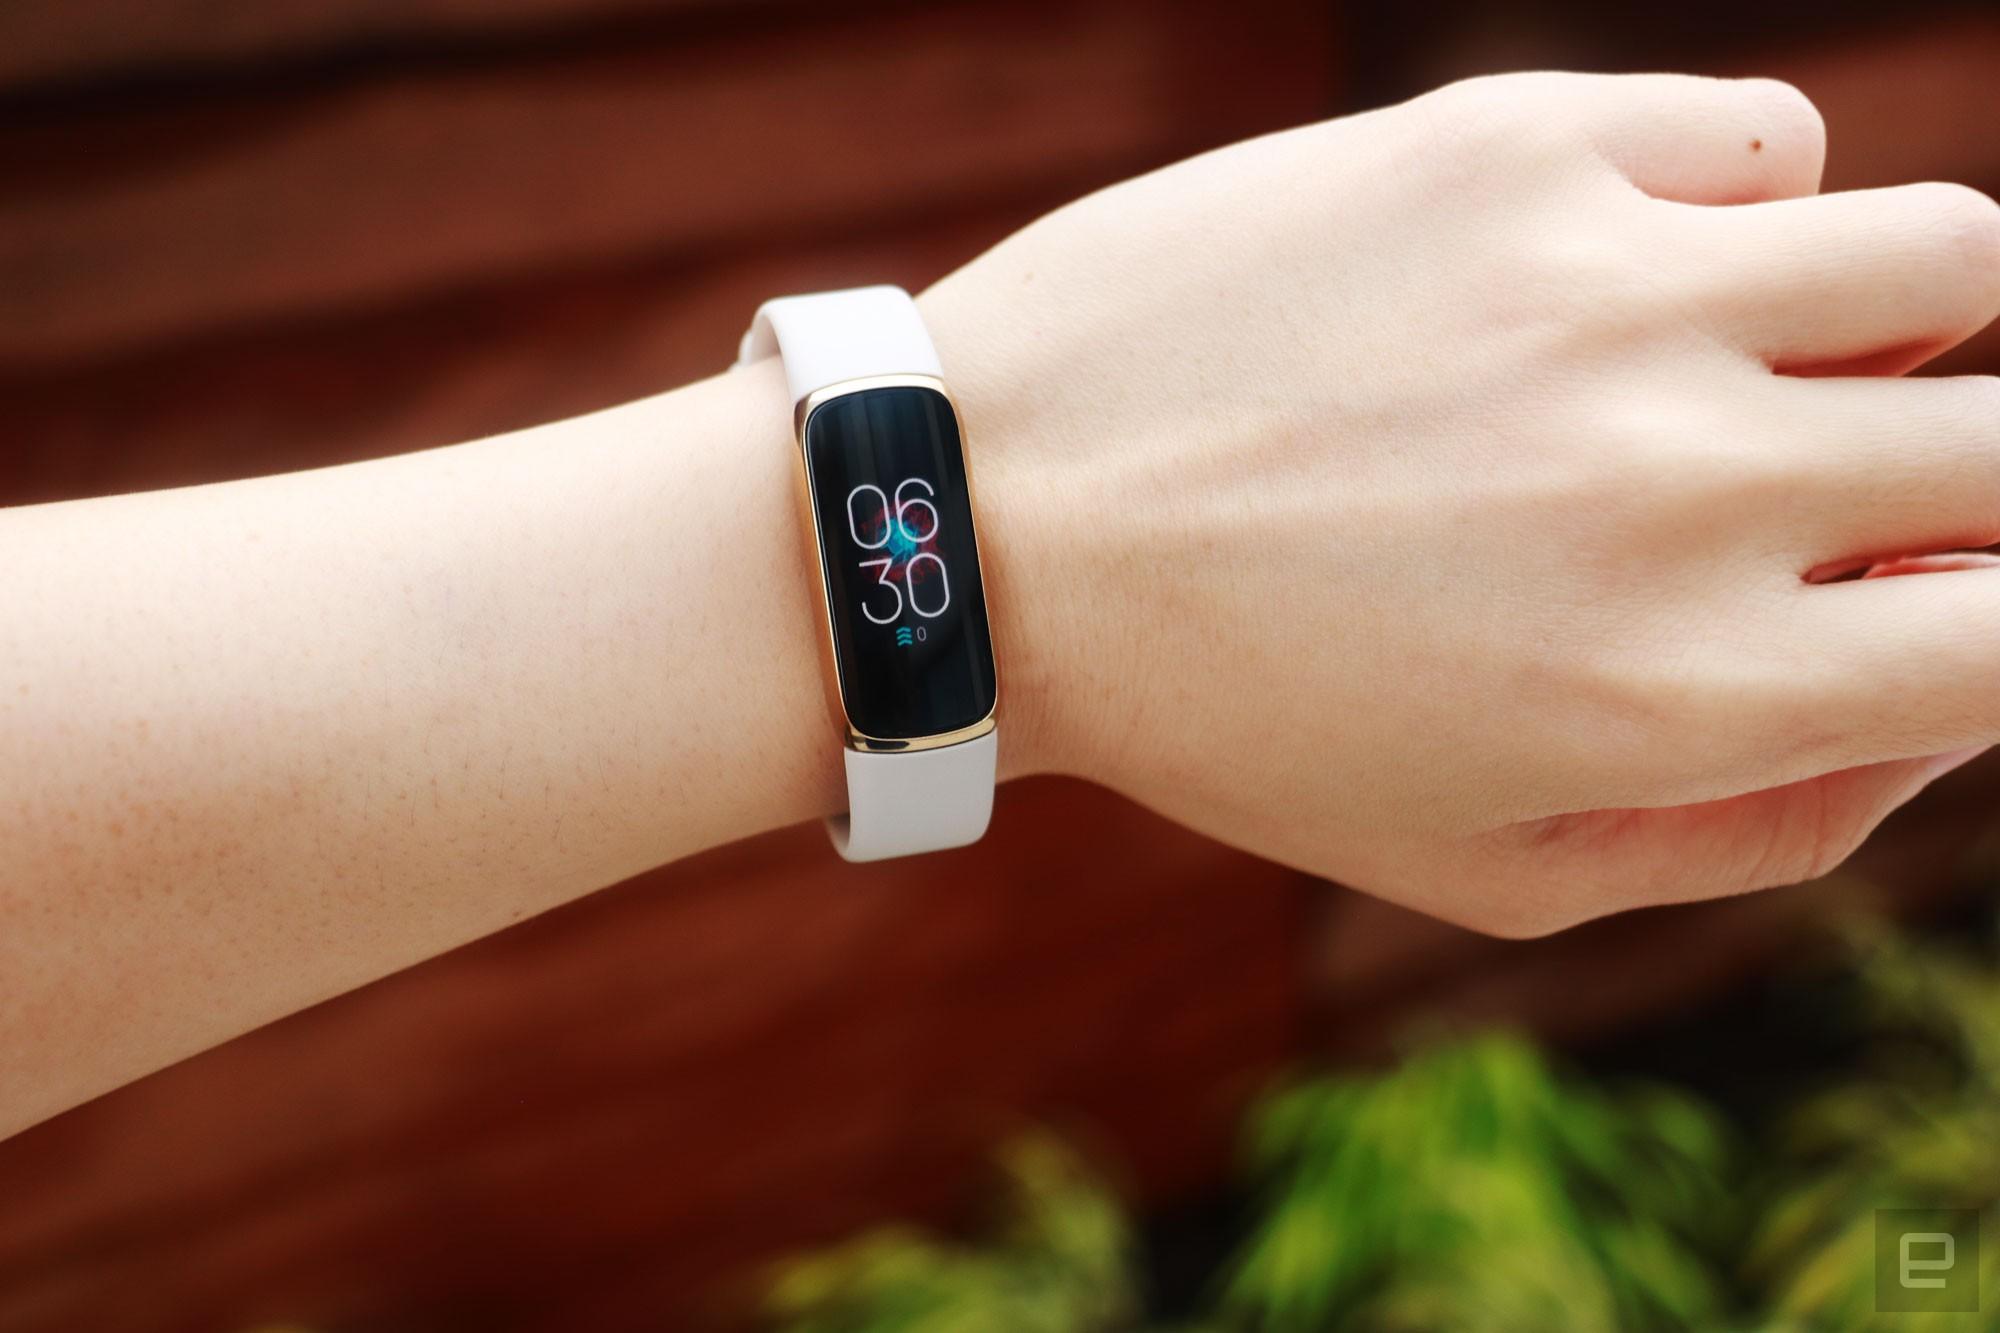 The Complete Guide to Cleaning a Fitbit